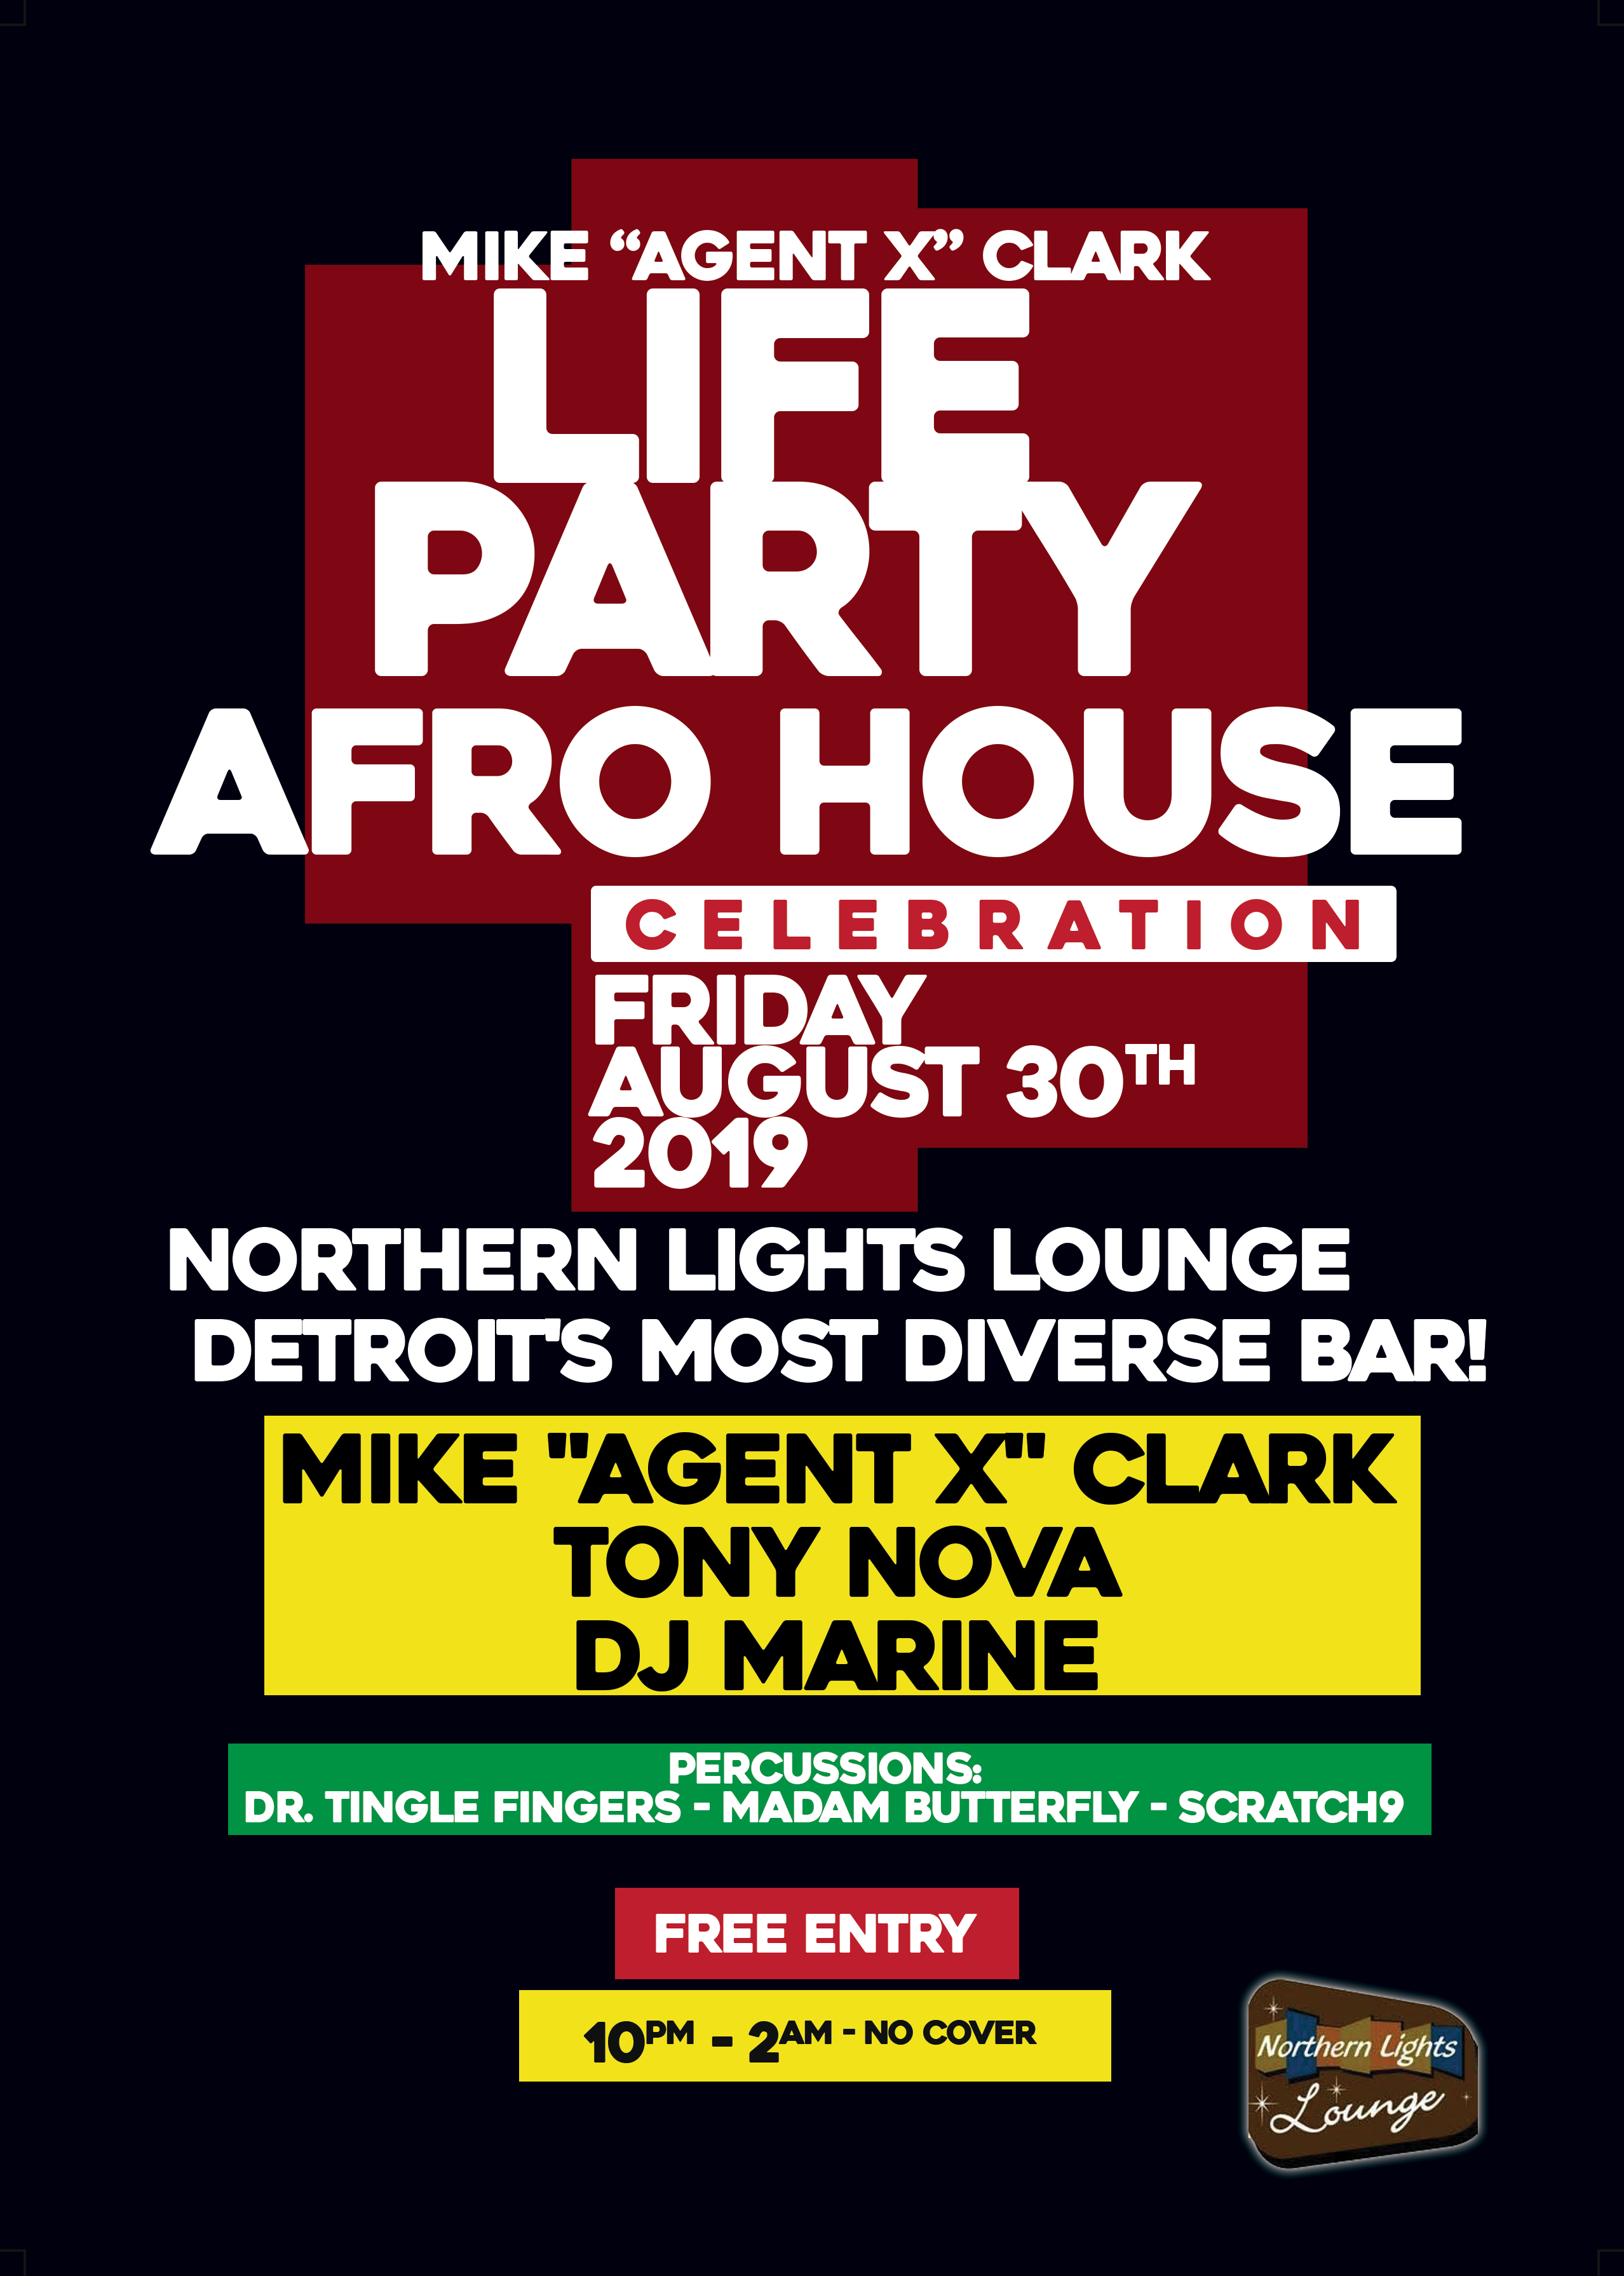 Life Party – Afro House Celebration August 30th